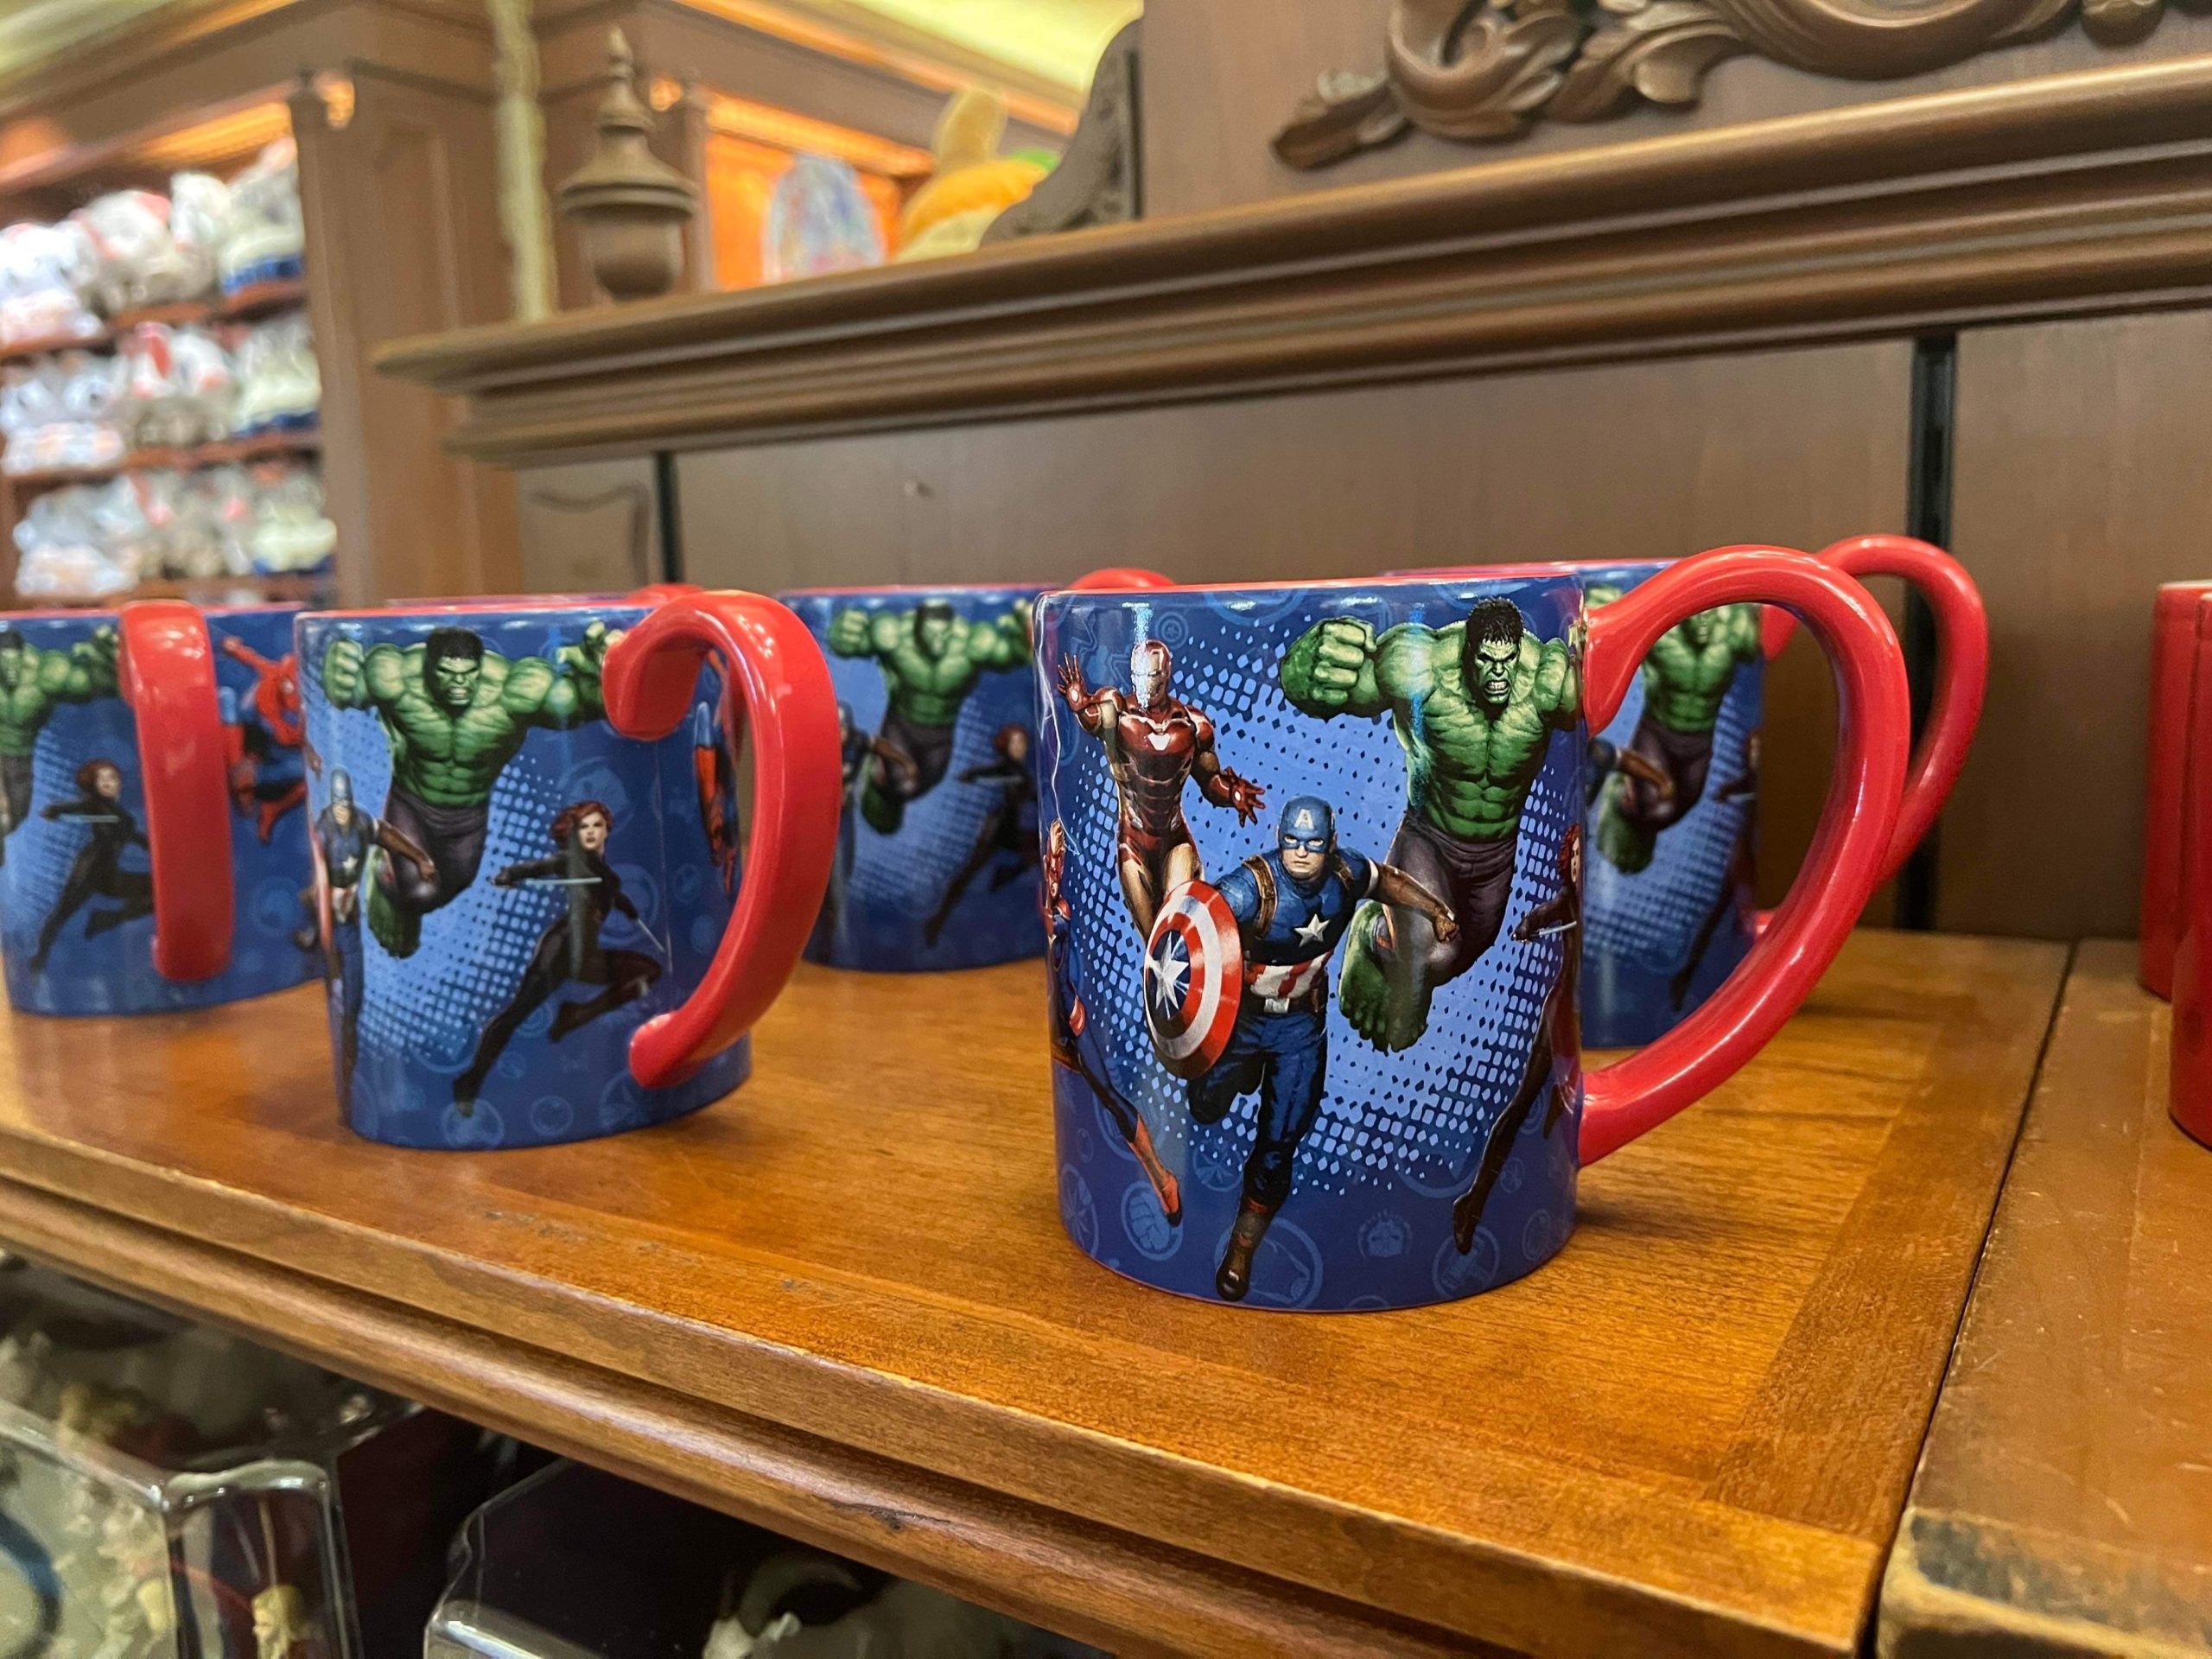 Have a Heroic Morning with These Star Wars and Marvel Meta Mugs